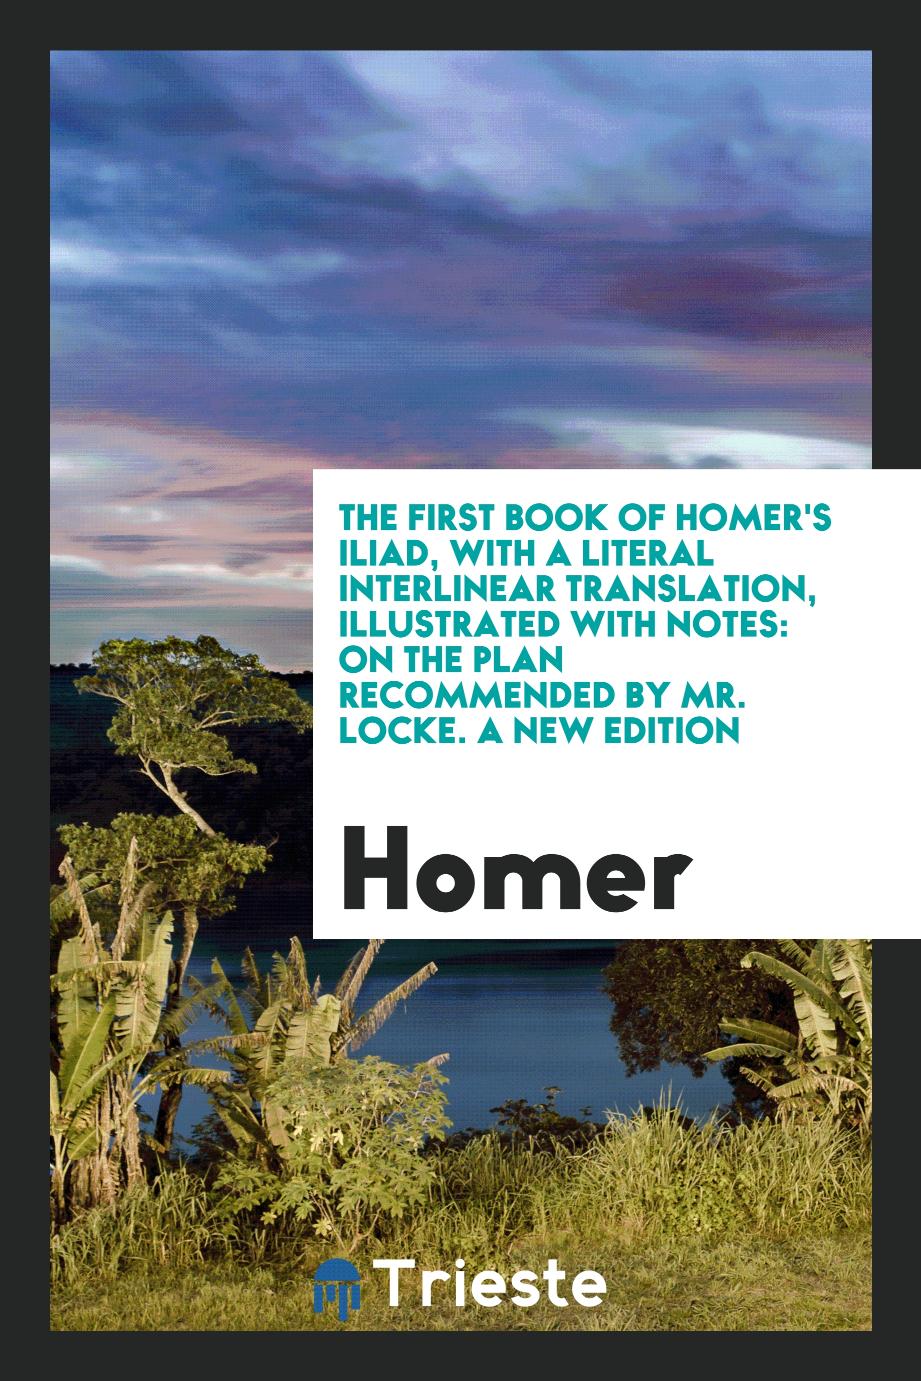 The First Book of Homer's Iliad, with a Literal Interlinear Translation, Illustrated with Notes: On the Plan Recommended by Mr. Locke. A New Edition